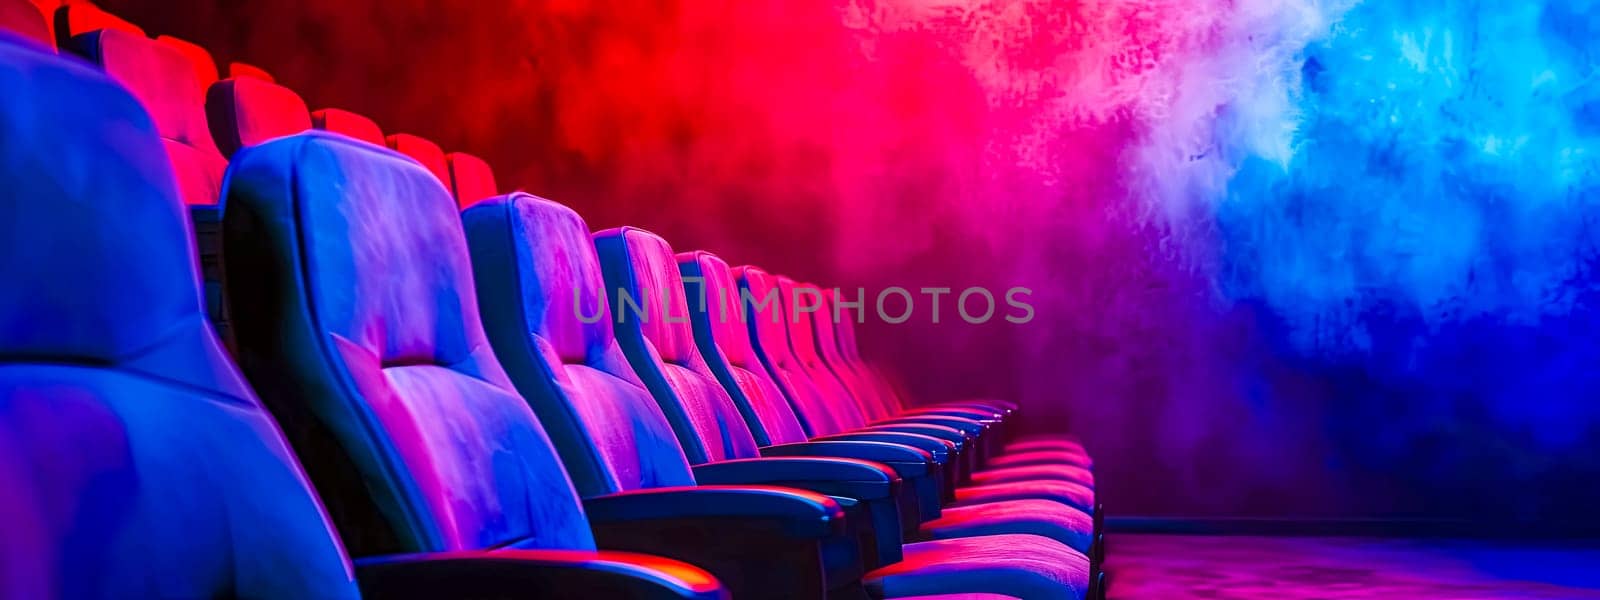 Vibrant cinema seats in red and blue hues with atmospheric smoky background. by Edophoto